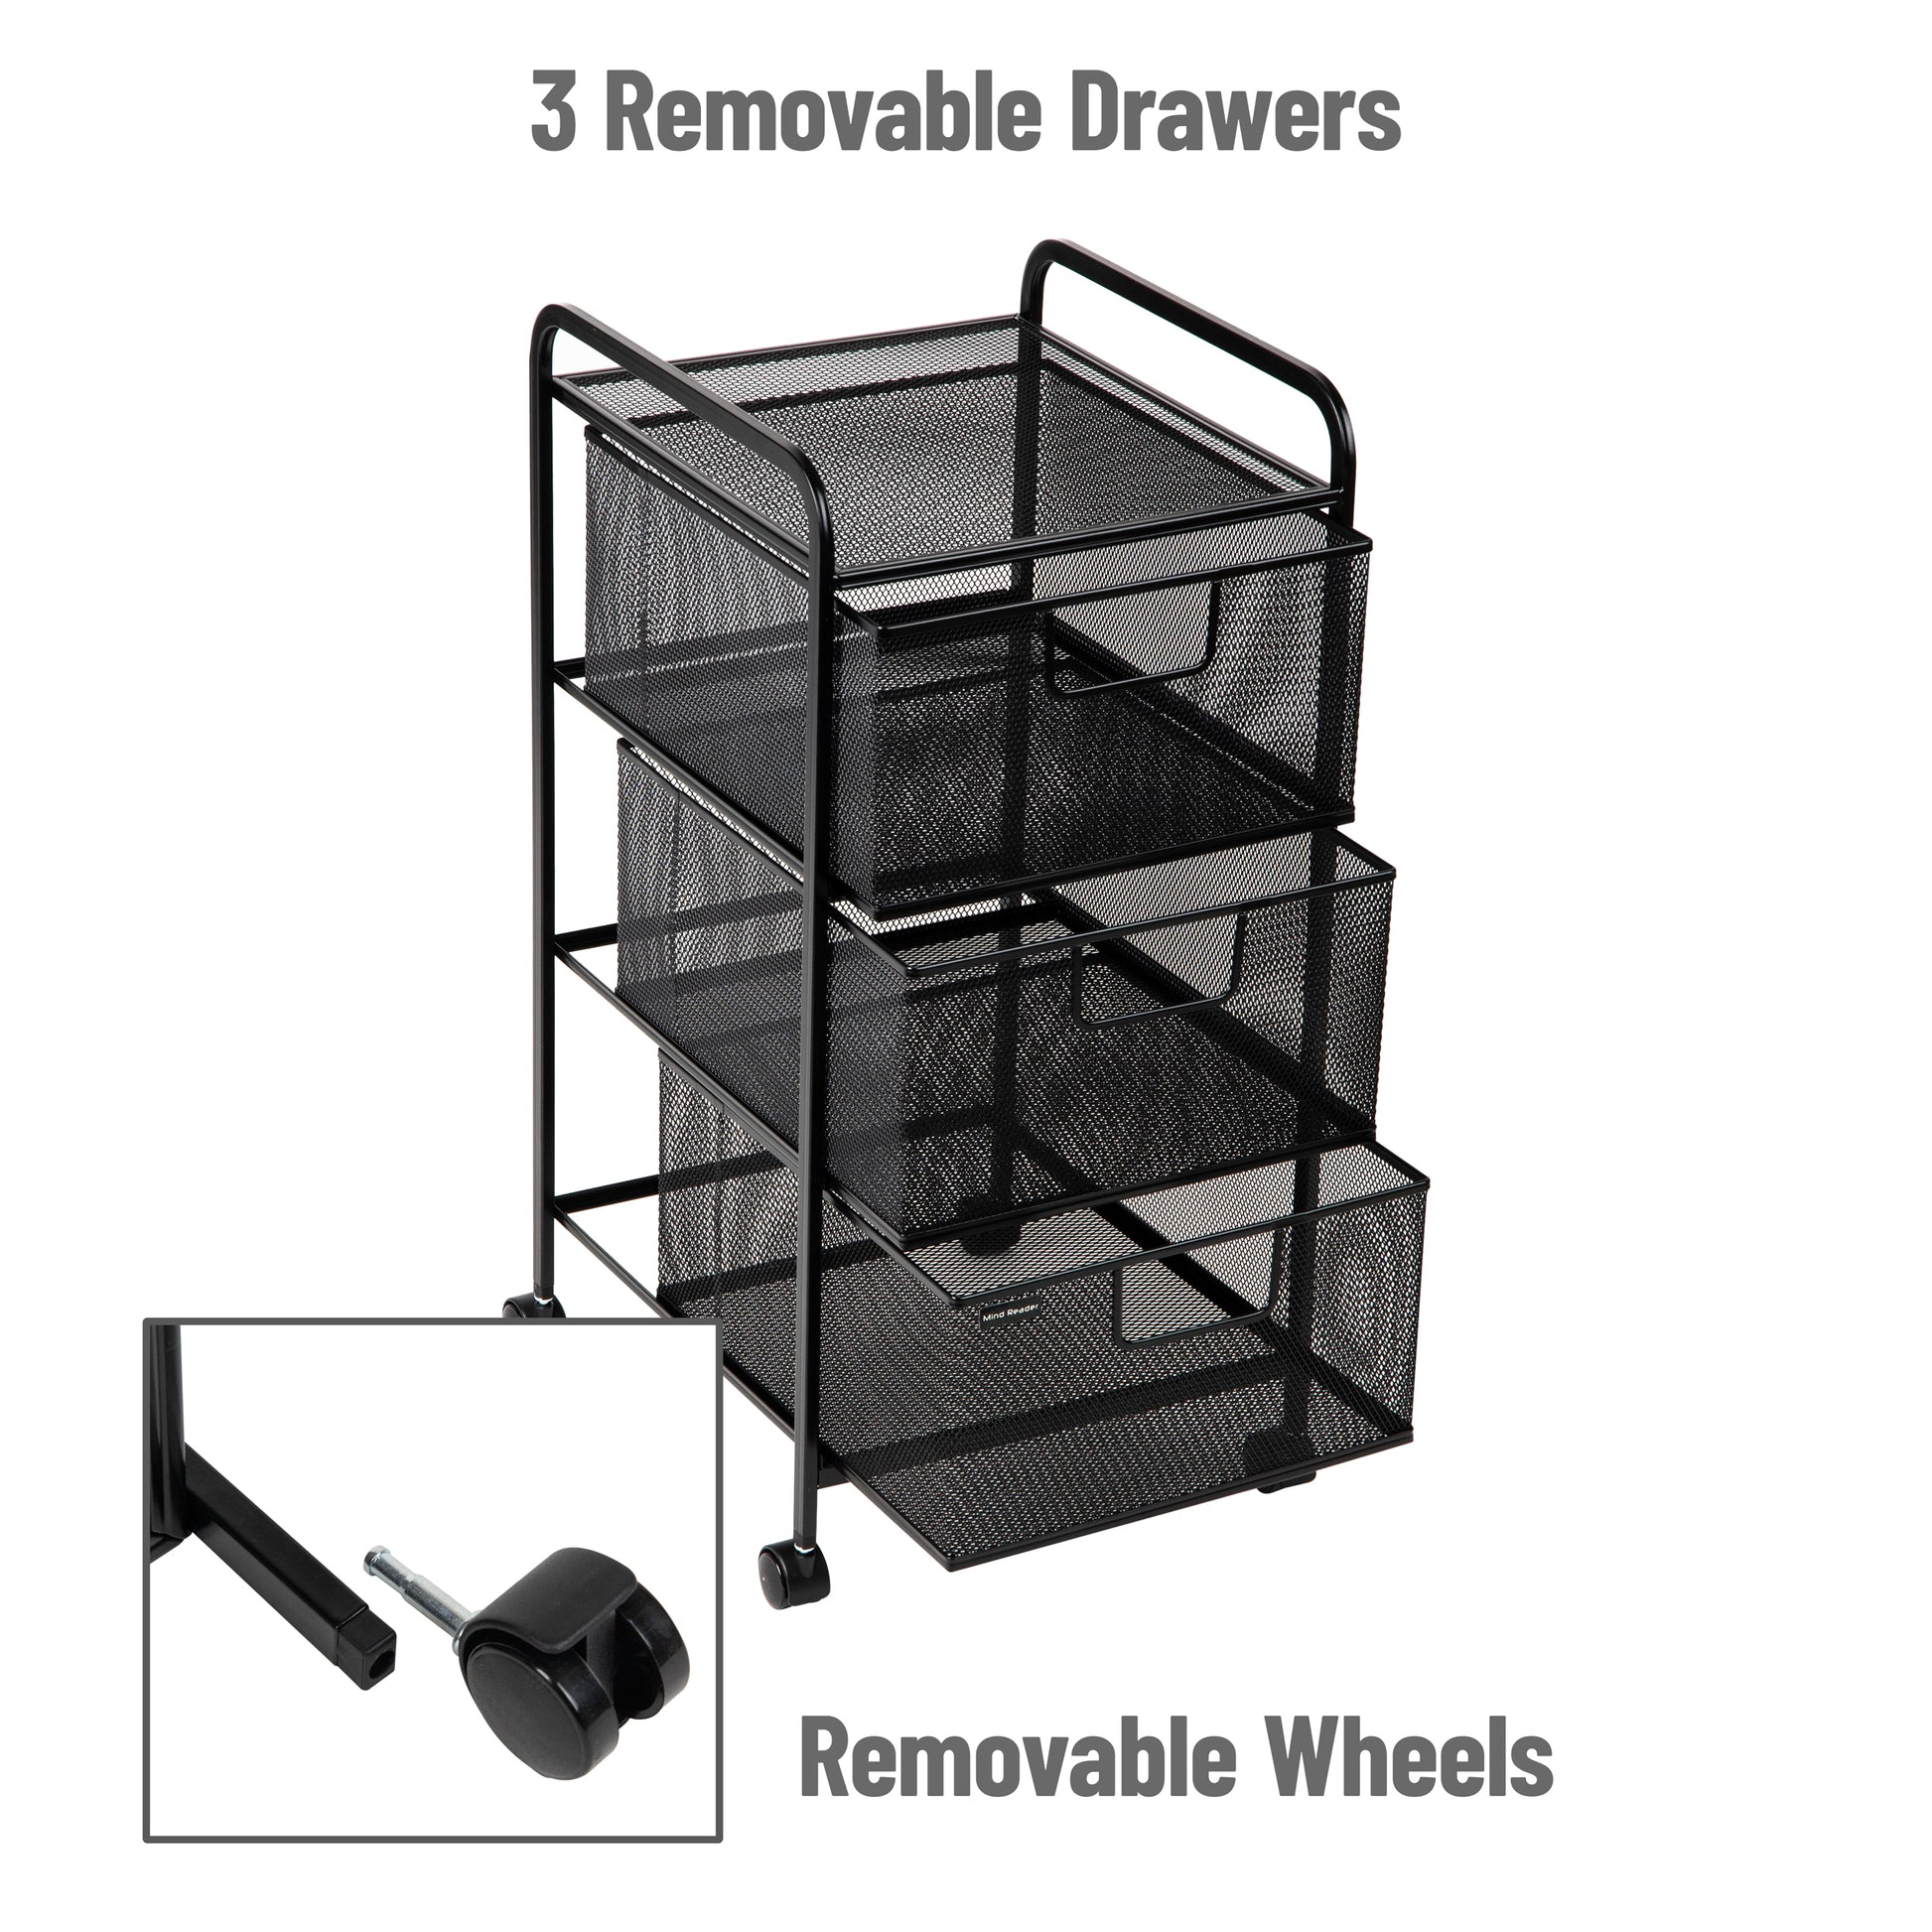 carts with wheels and storage drawers